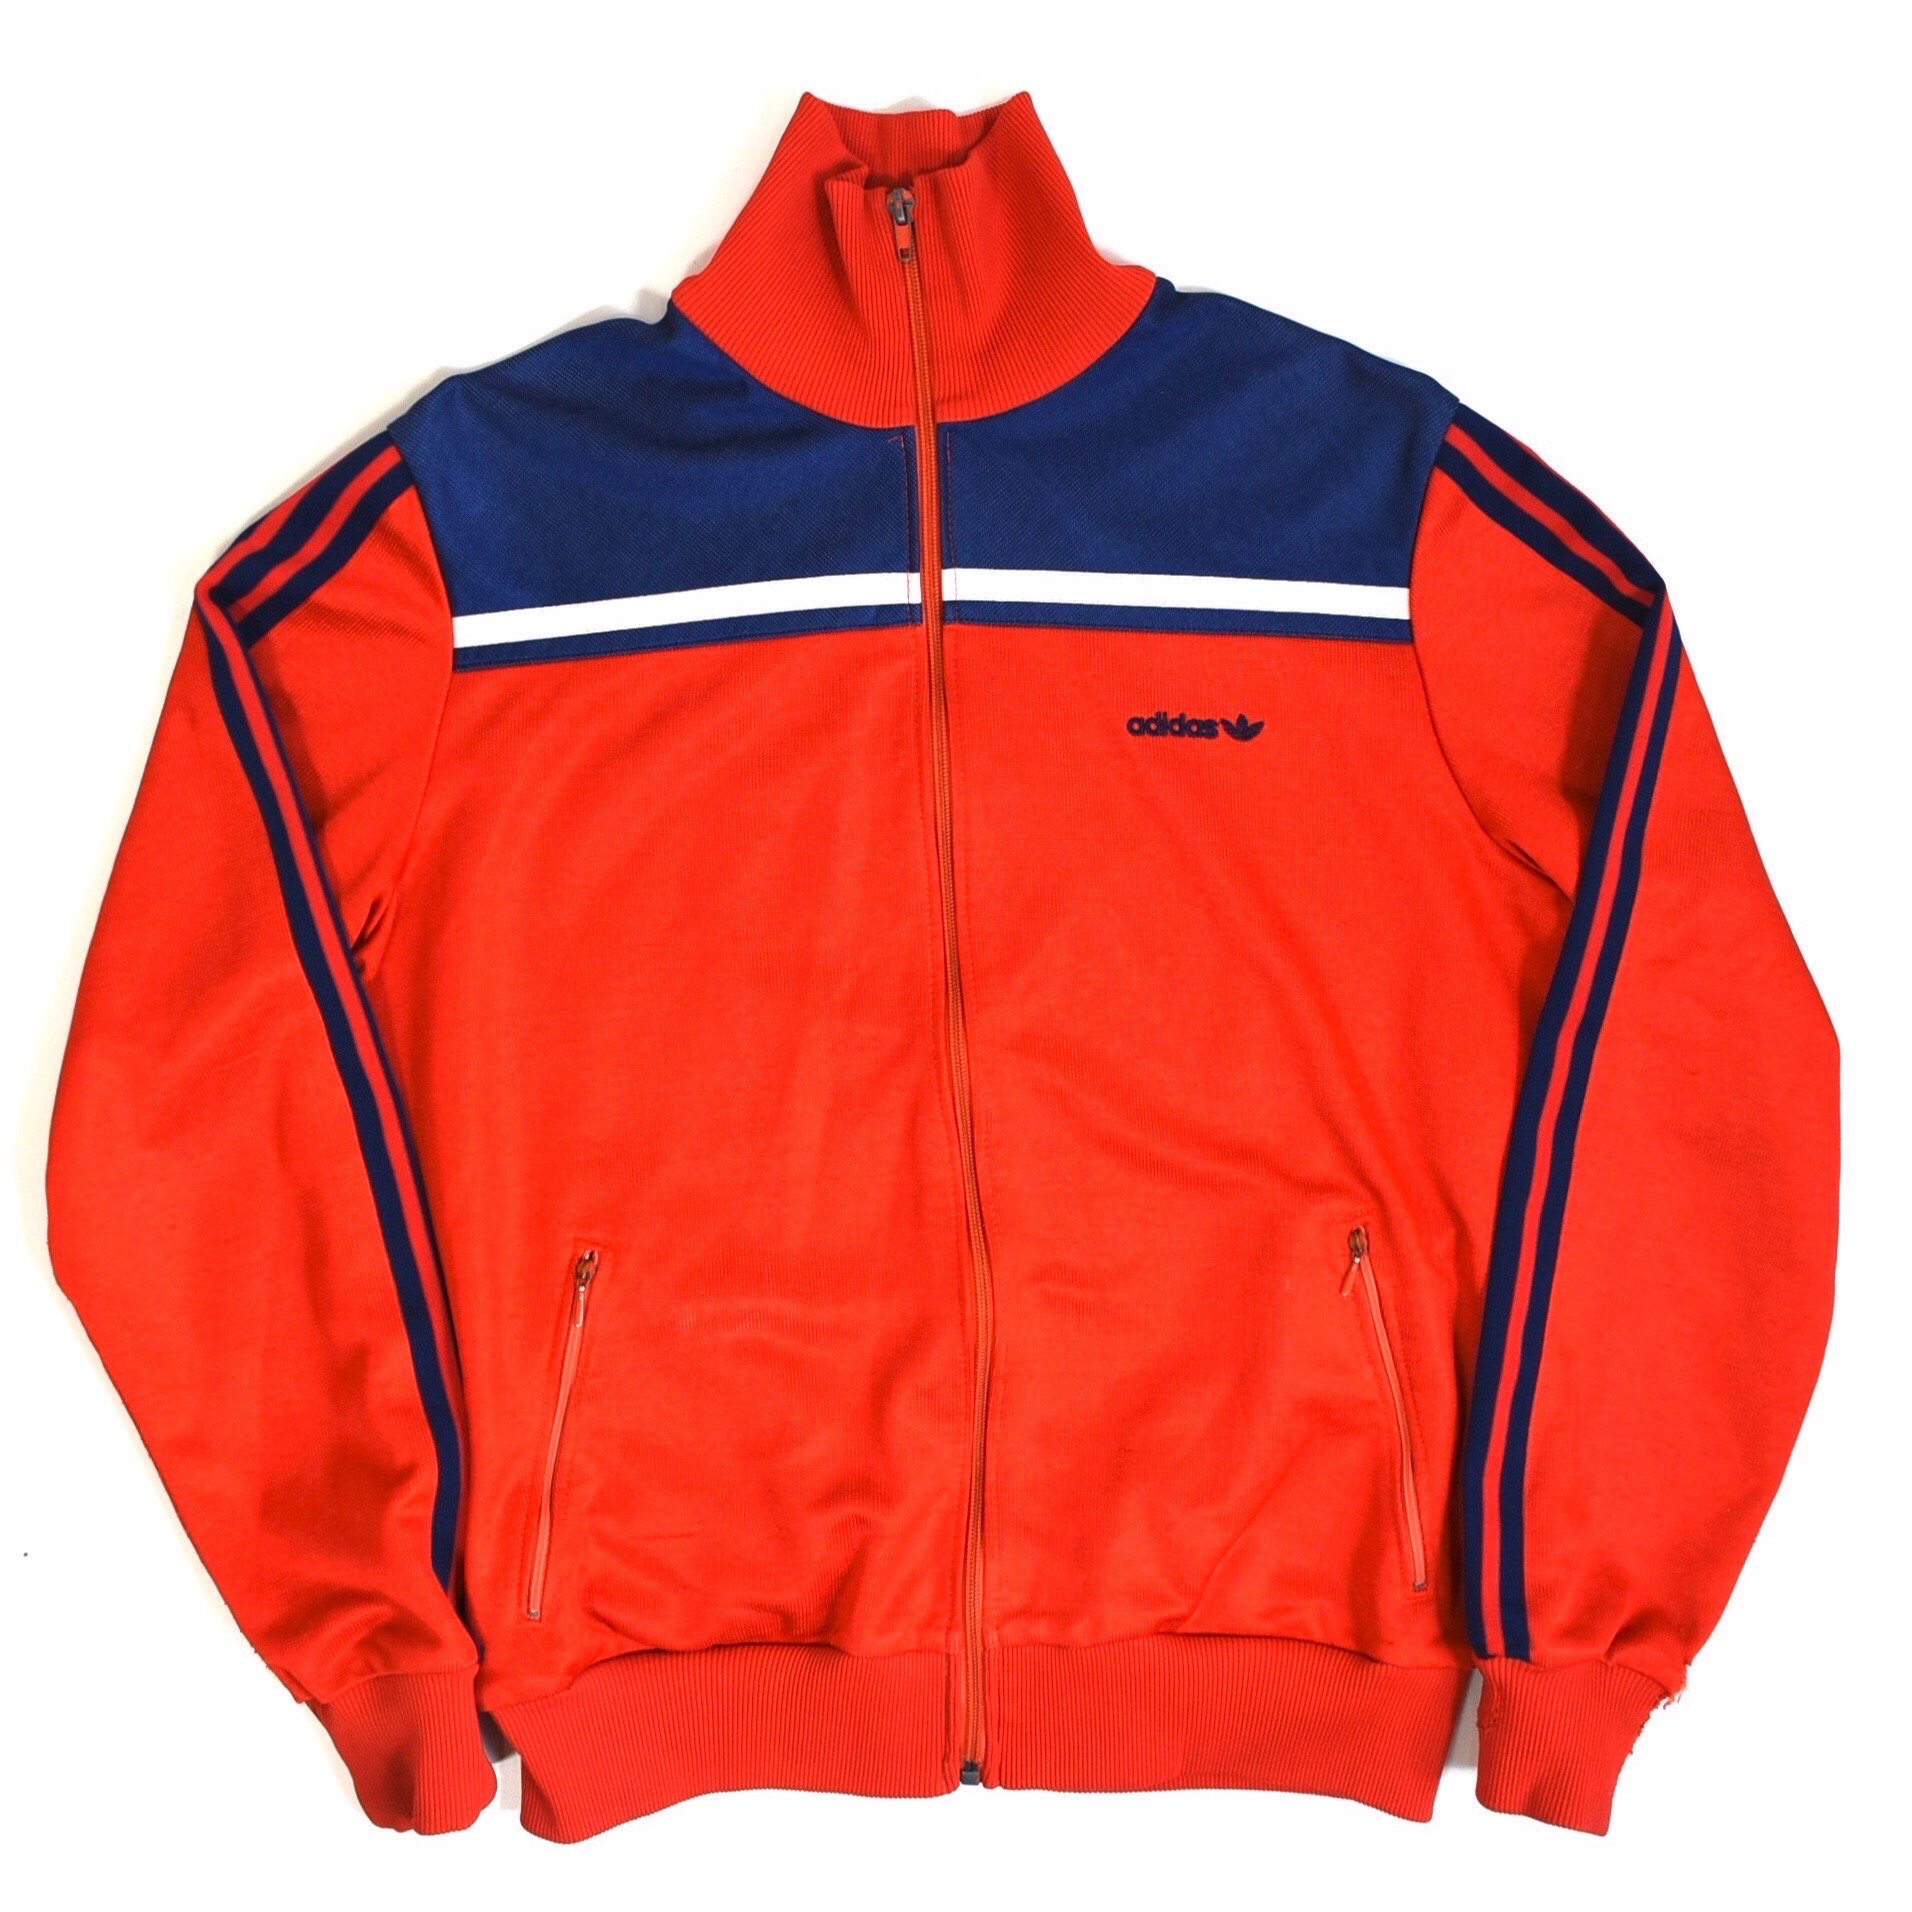 1980s ADIDAS Track jacket MADE IN HUNGARY MISSION WEB STORE